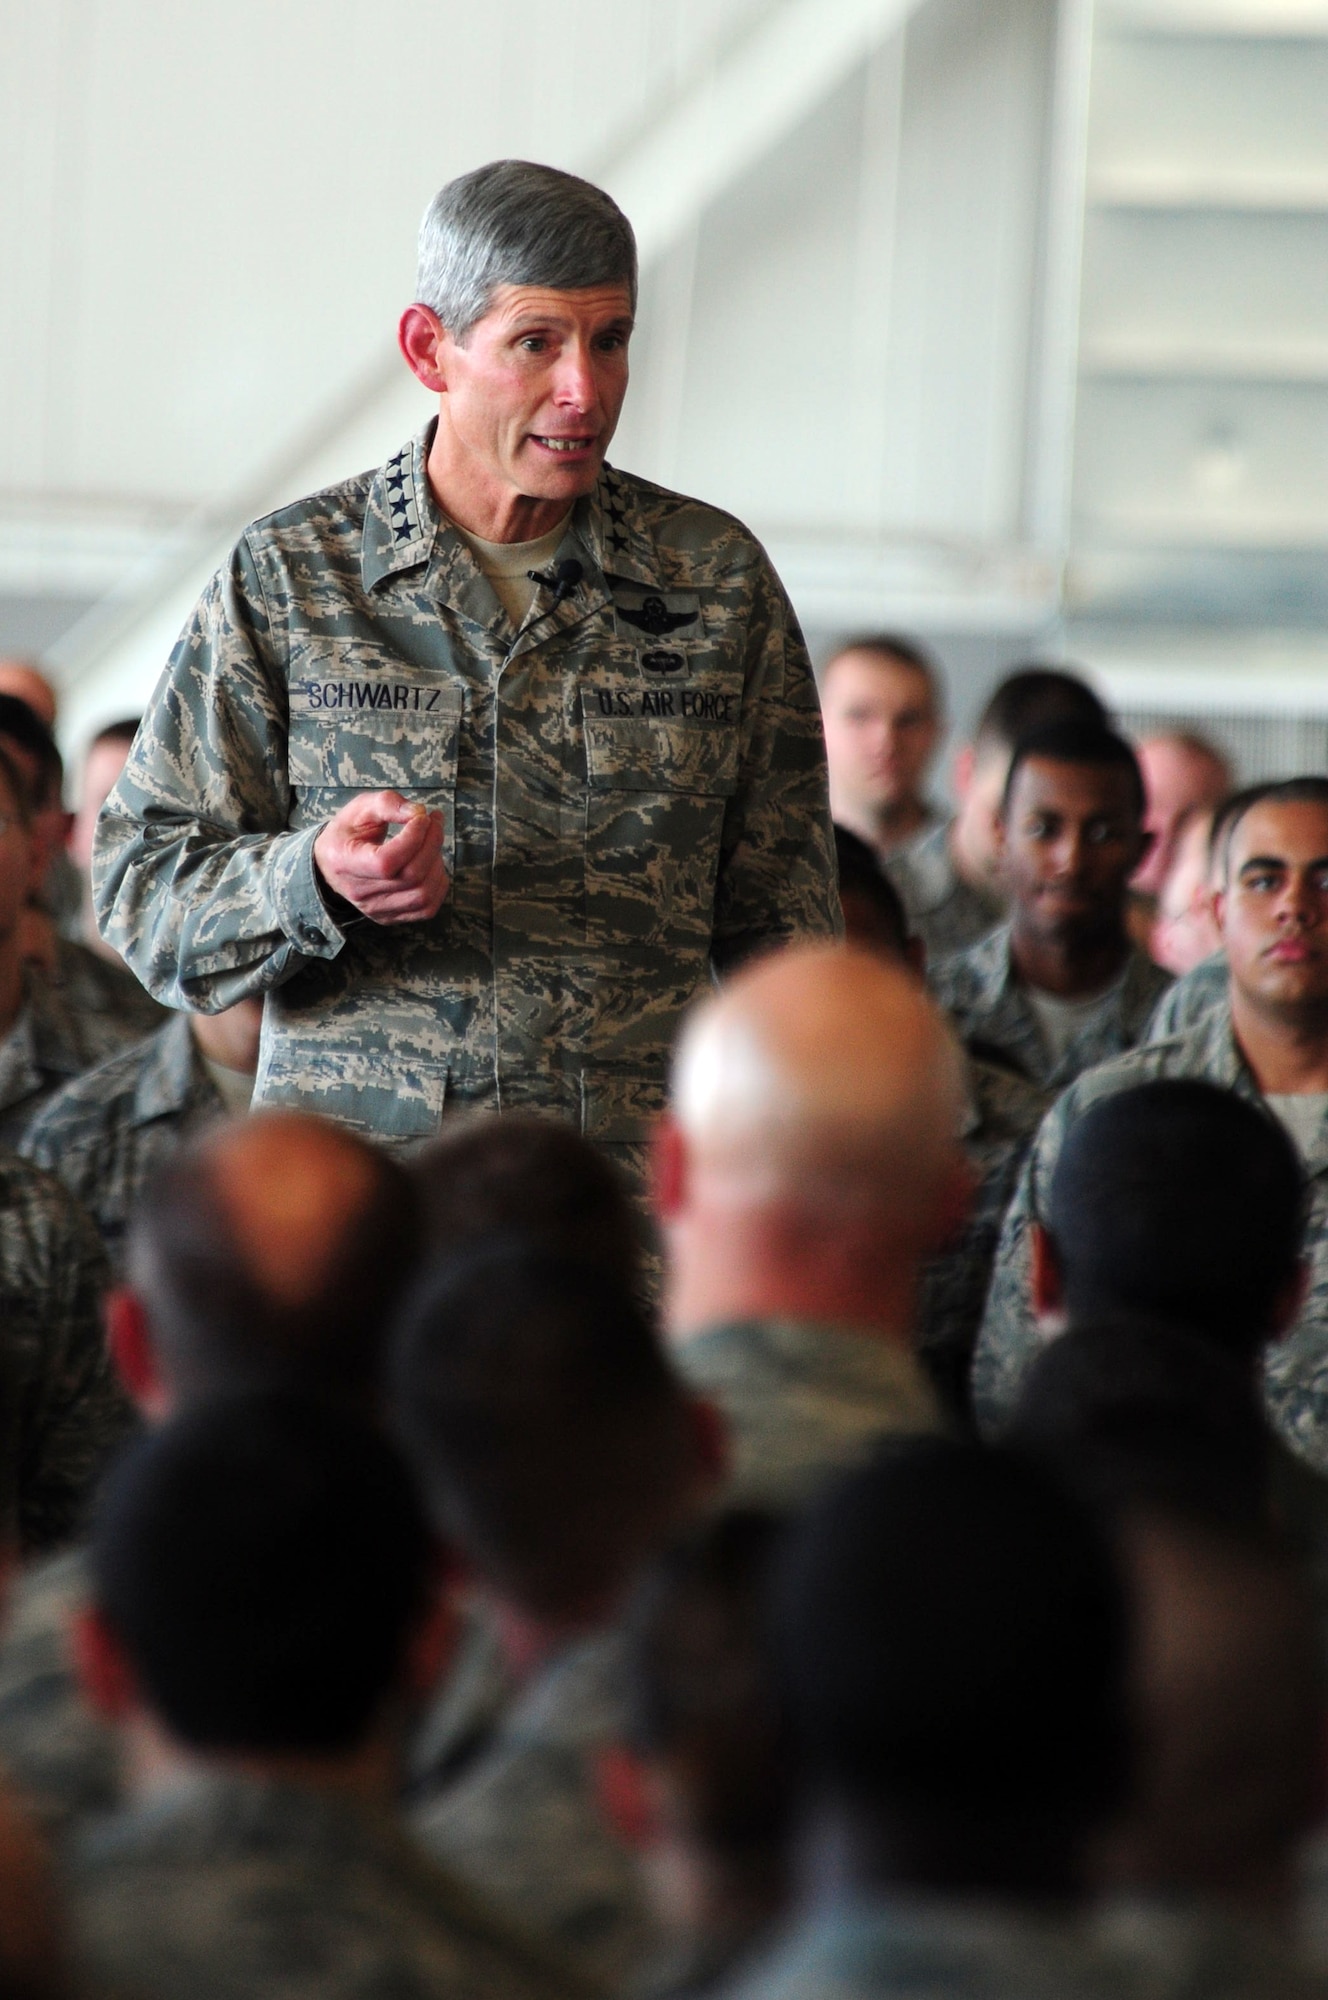 Air Force Chief of Staff Gen. Norton Schwartz speaks to Airmen Oct. 4, 2011, at Minot Air Force Base, N.D., during an all-call. Schwartz expressed gratitude for their efforts in aiding the Minot community, as well as each other, during the flooding this past summer. (U.S. Air Force photo/Senior Airman Michael Veloz)